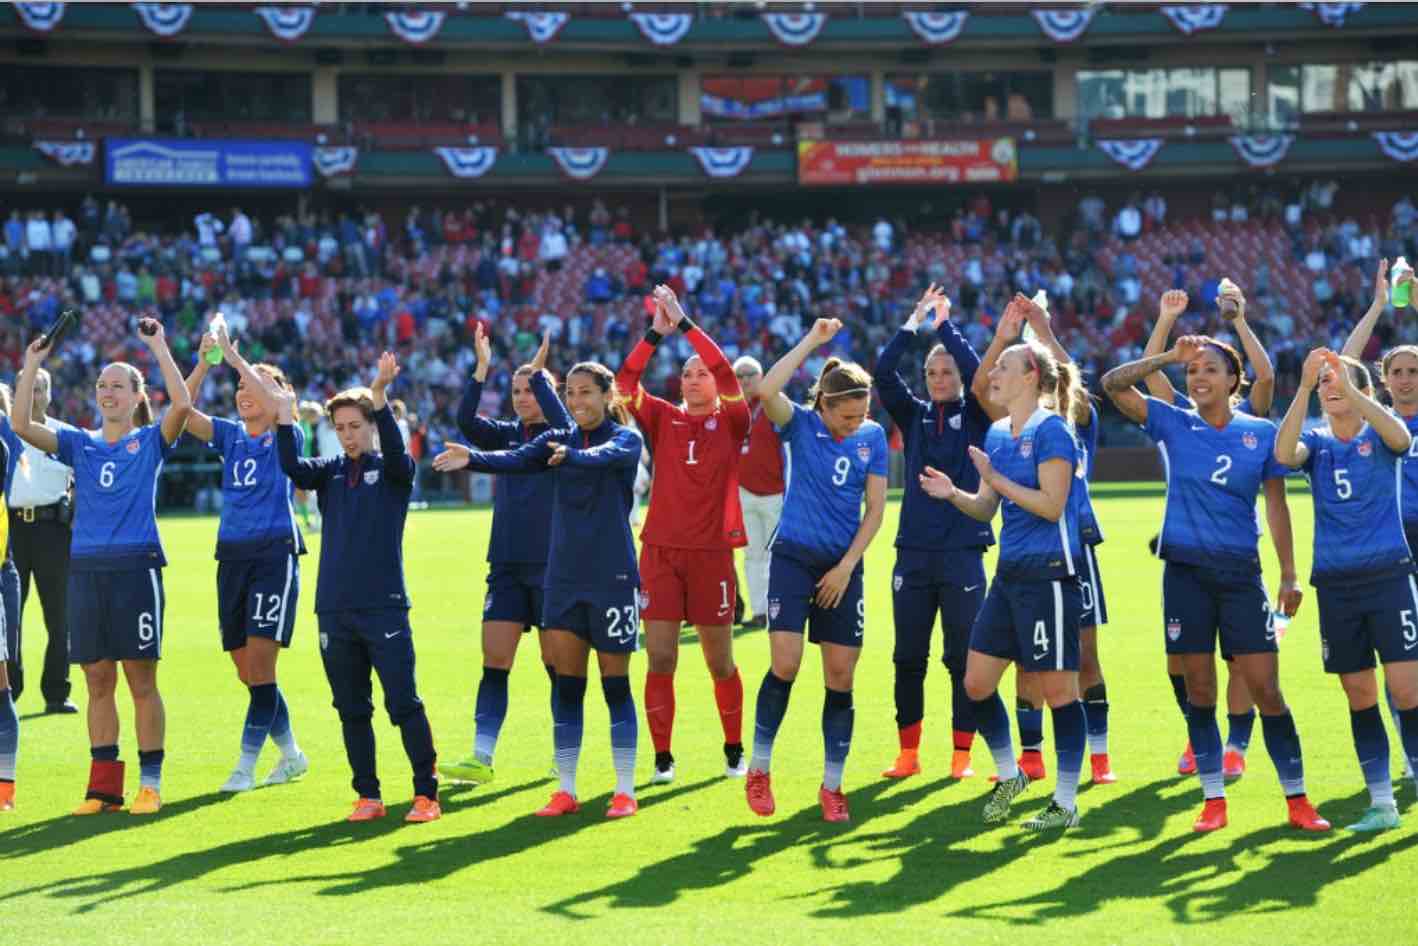 Over 35,000 tickets sold for USWNT friendly